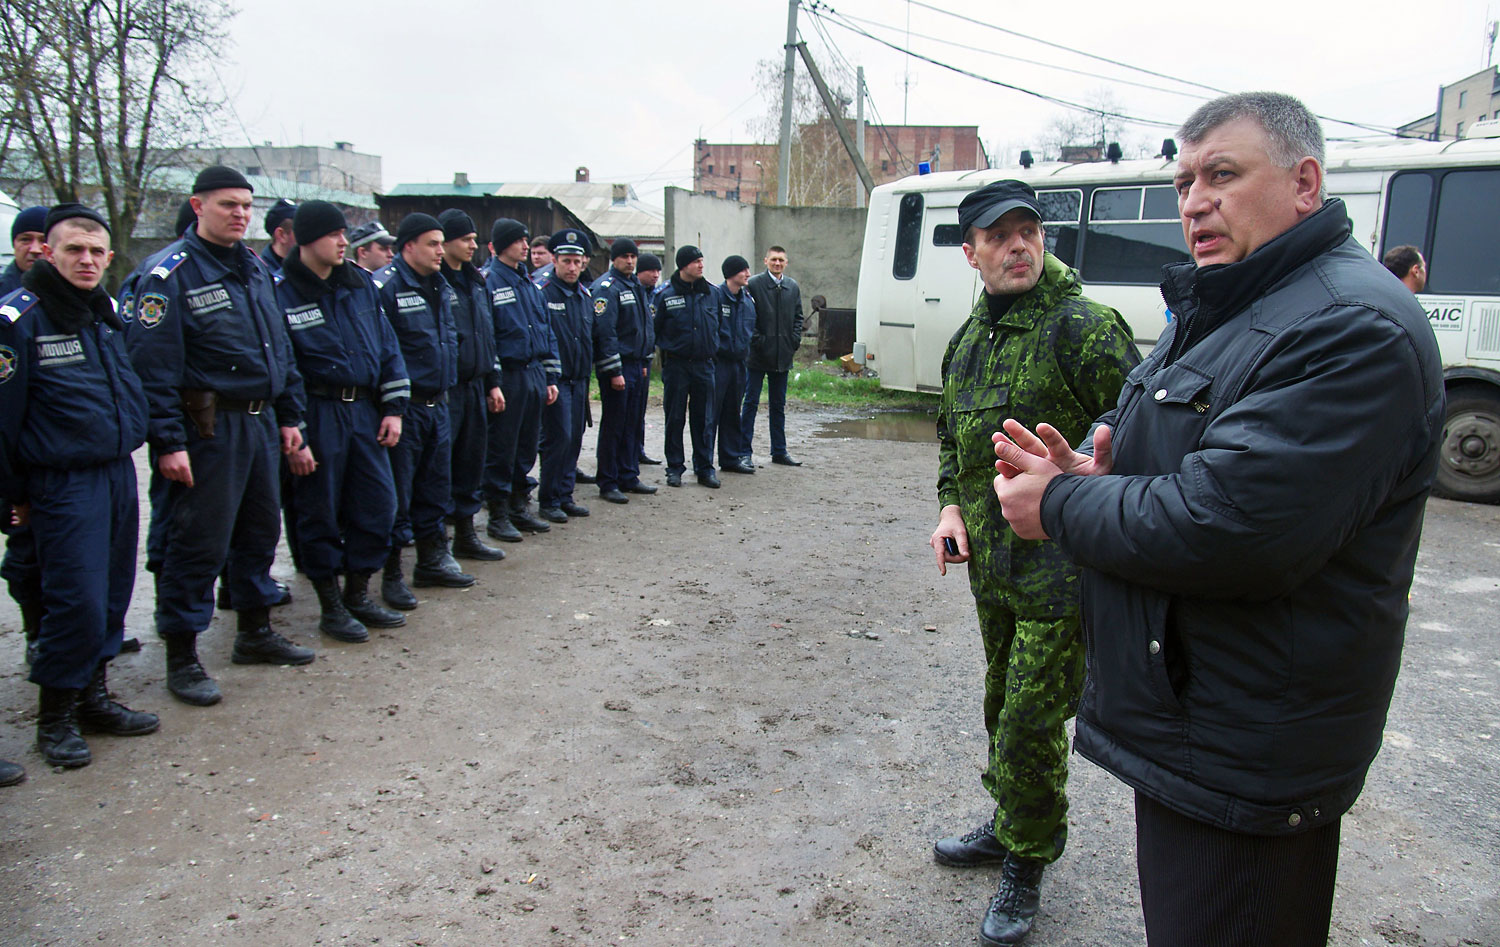 A man, who introduced himself as a lieutenant colonel of the Russian army, speaks to policemen as he introduces his appointed new head of the regional police, after the regional police building storm was stormed and its chief detained, in the eastern Ukrainian city of Gorlovka, near Donetsk, on April 14, 2014. 